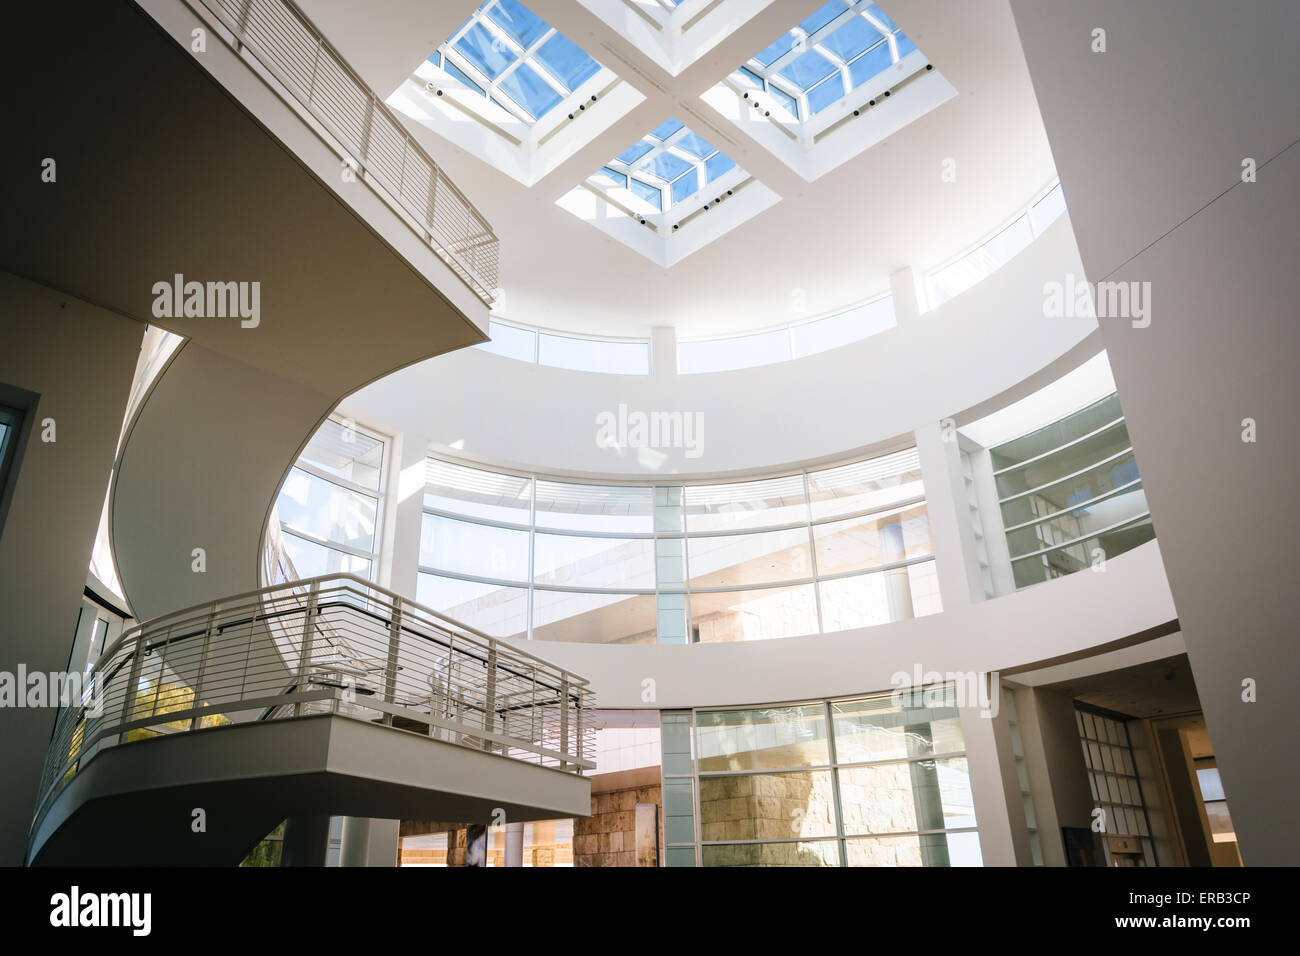 Modern interior architecture at the Getty Center in Brentwood, California. Stock Photo